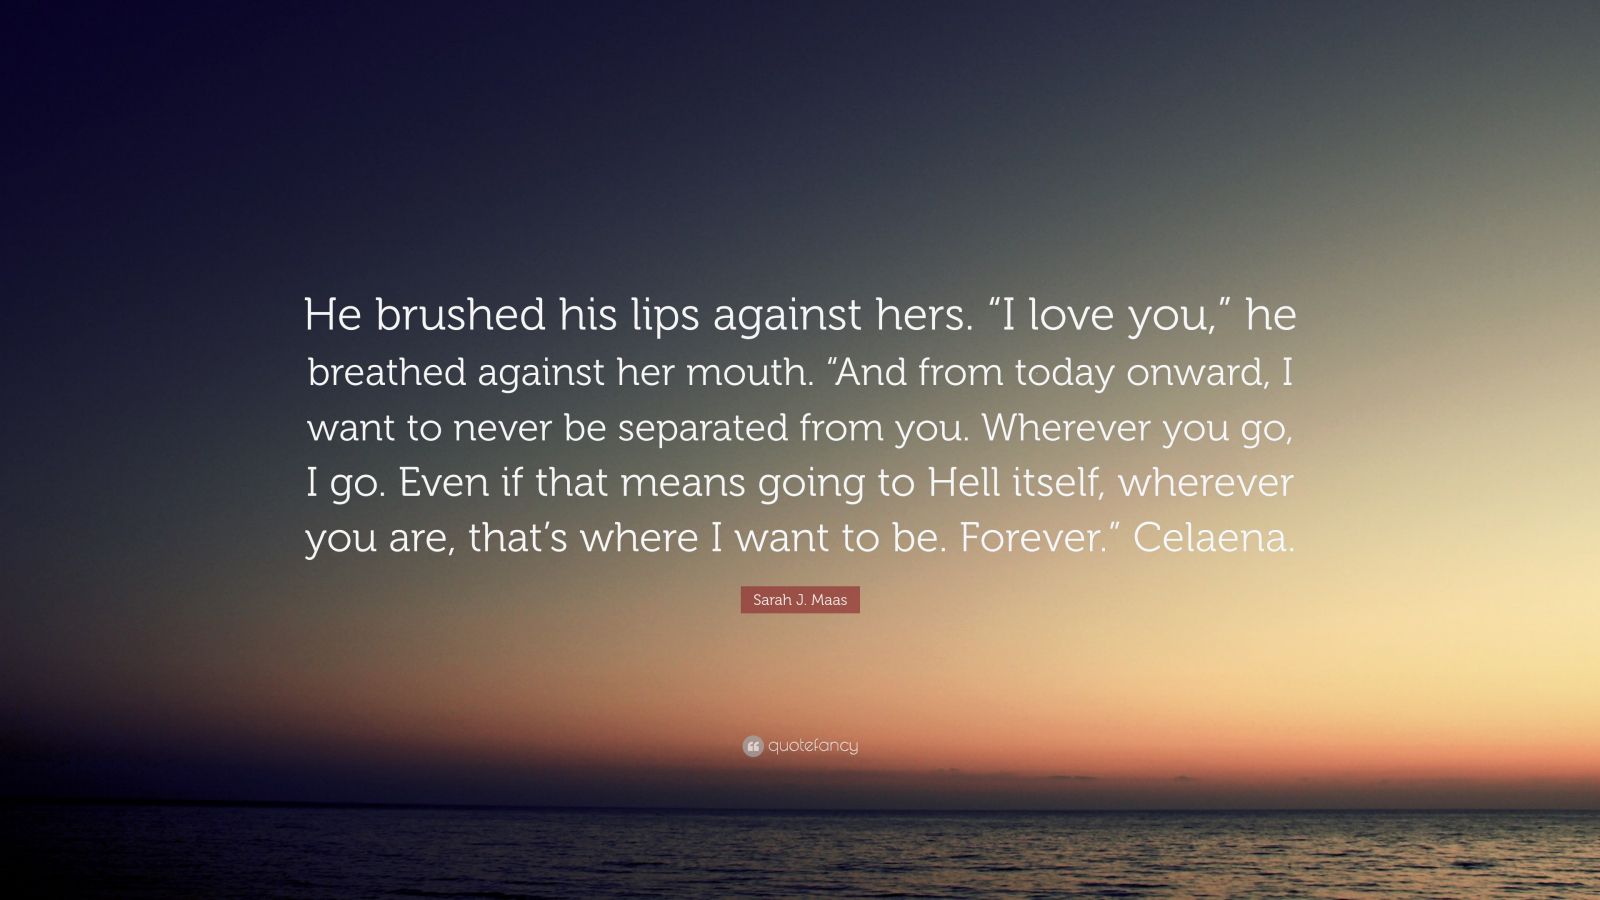 Sarah J Maas Quote He Brushed His Lips Against Hers I Love You He Breathed Against Her